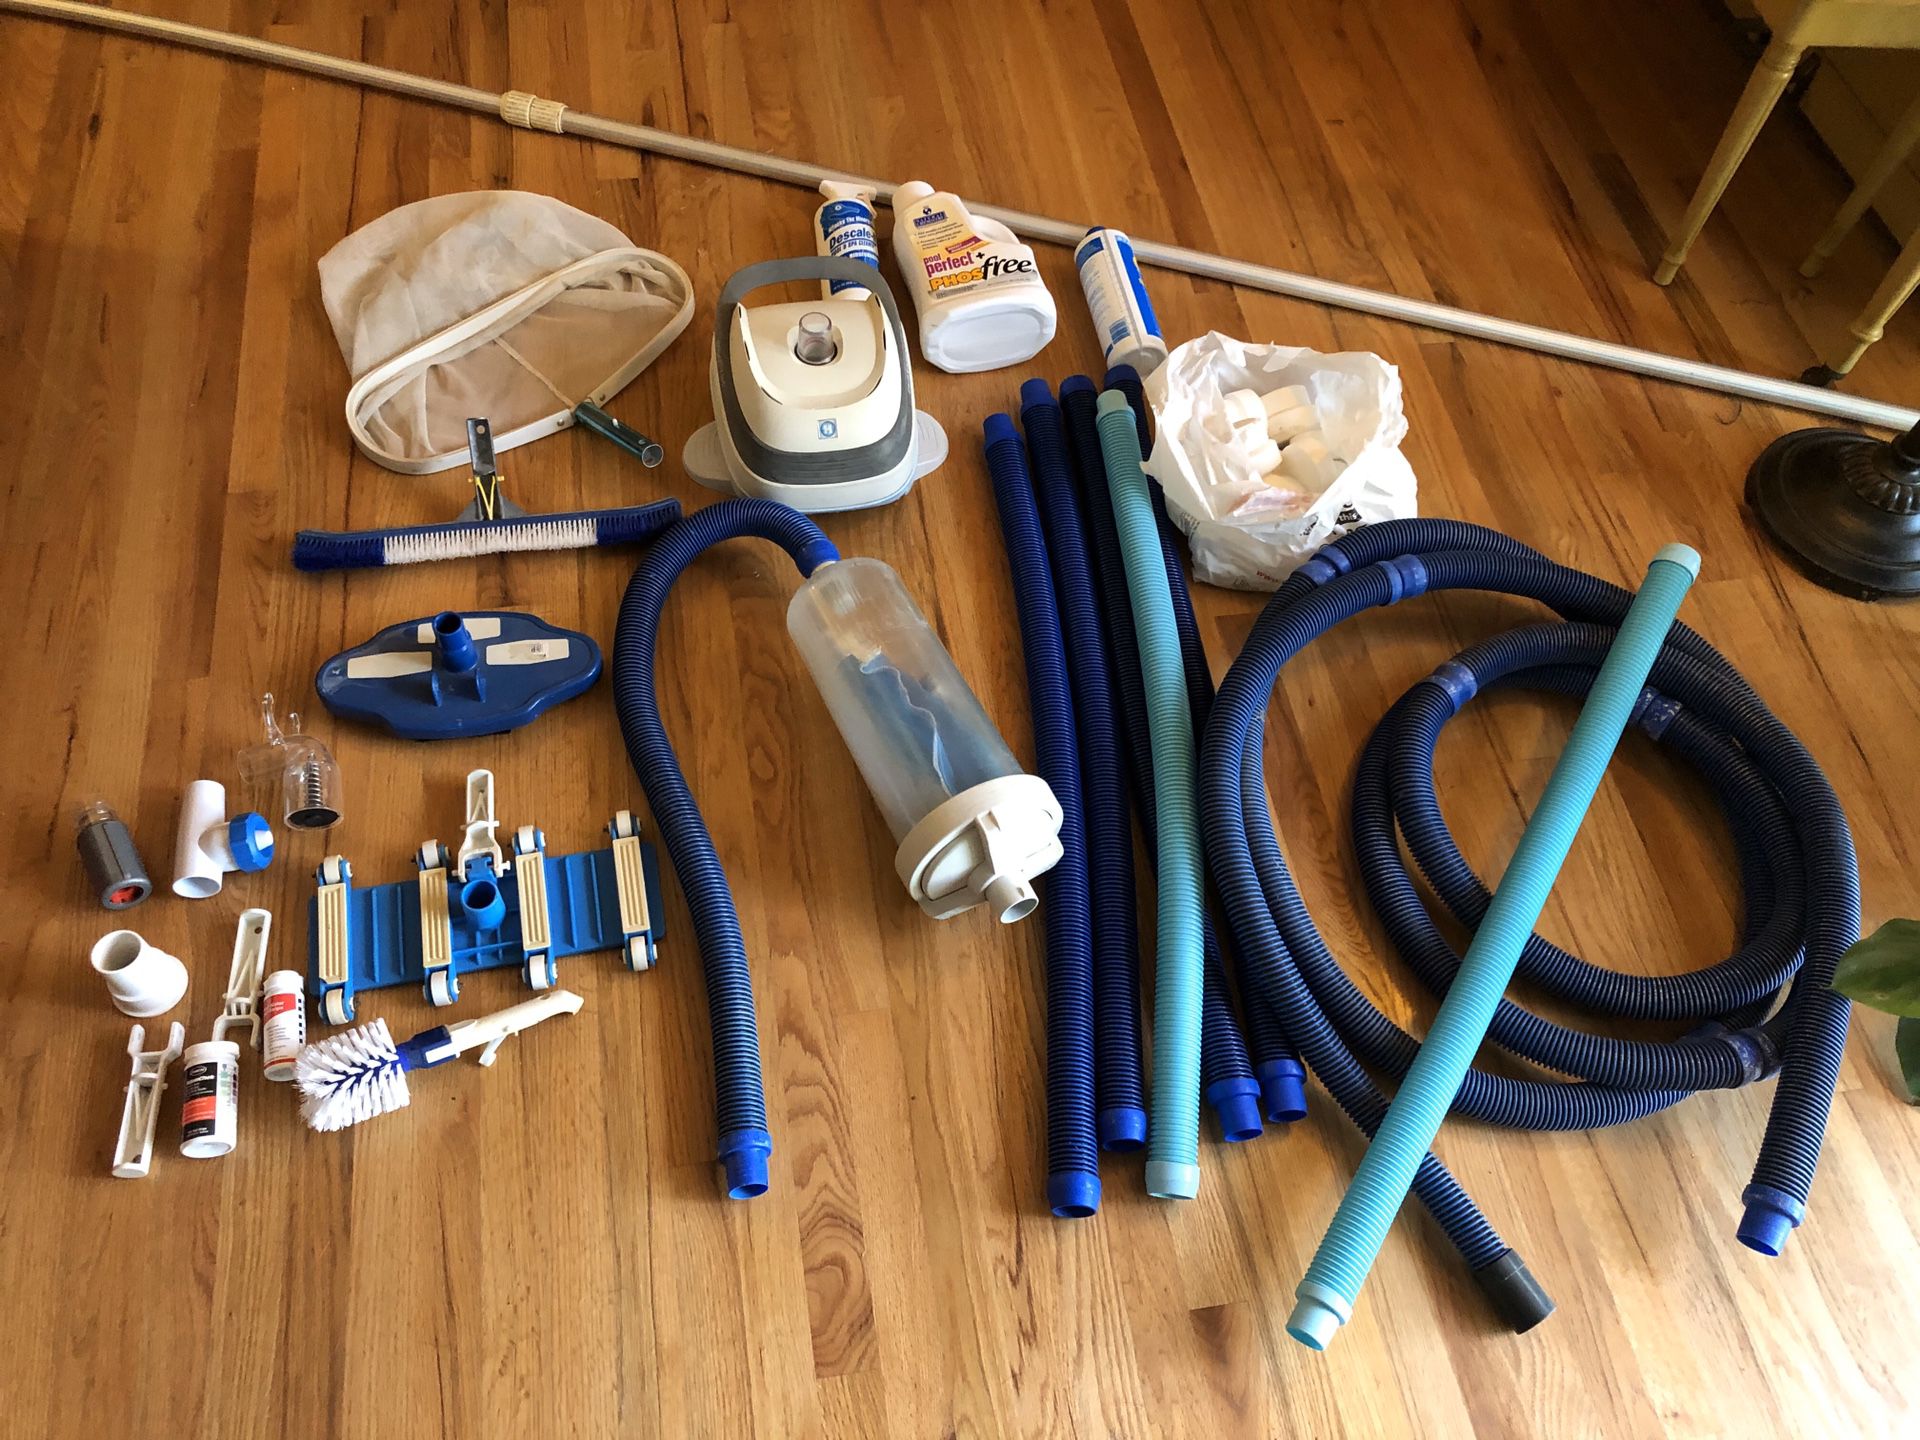 Pool equipment and misc pool supplies. Am open to negotiate prices on selling individual items. Some hoses brand new.